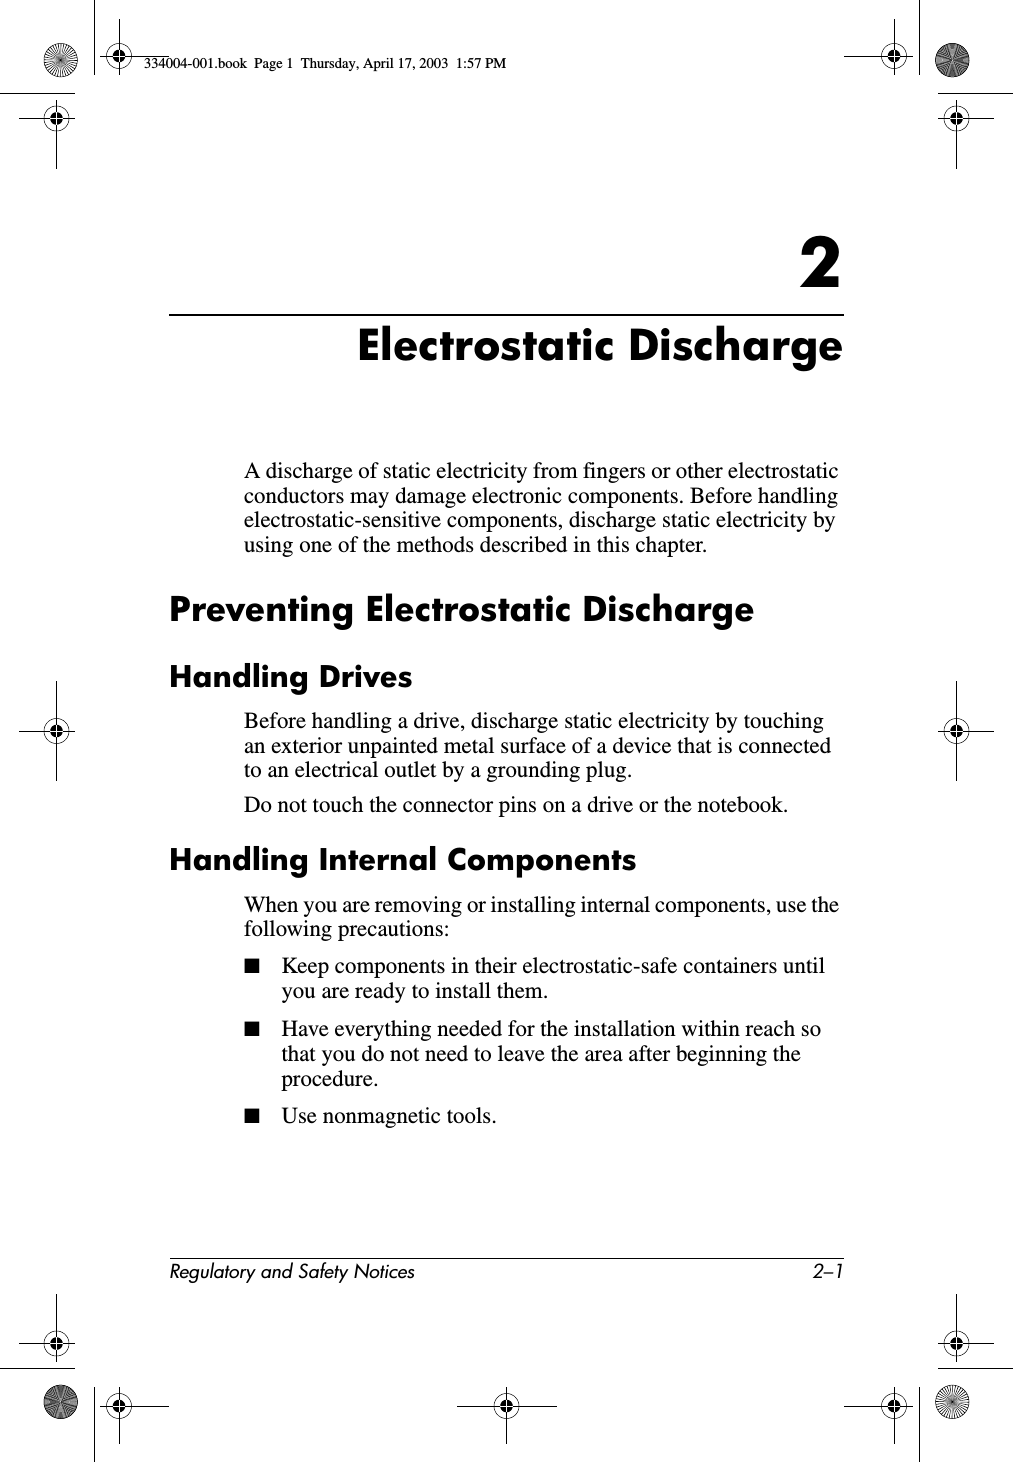 Regulatory and Safety Notices 2–12Electrostatic DischargeA discharge of static electricity from fingers or other electrostatic conductors may damage electronic components. Before handling electrostatic-sensitive components, discharge static electricity by using one of the methods described in this chapter.Preventing Electrostatic DischargeHandling DrivesBefore handling a drive, discharge static electricity by touching an exterior unpainted metal surface of a device that is connected to an electrical outlet by a grounding plug.Do not touch the connector pins on a drive or the notebook.Handling Internal ComponentsWhen you are removing or installing internal components, use the following precautions:■Keep components in their electrostatic-safe containers until you are ready to install them.■Have everything needed for the installation within reach so that you do not need to leave the area after beginning the procedure.■Use nonmagnetic tools.334004-001.book  Page 1  Thursday, April 17, 2003  1:57 PM